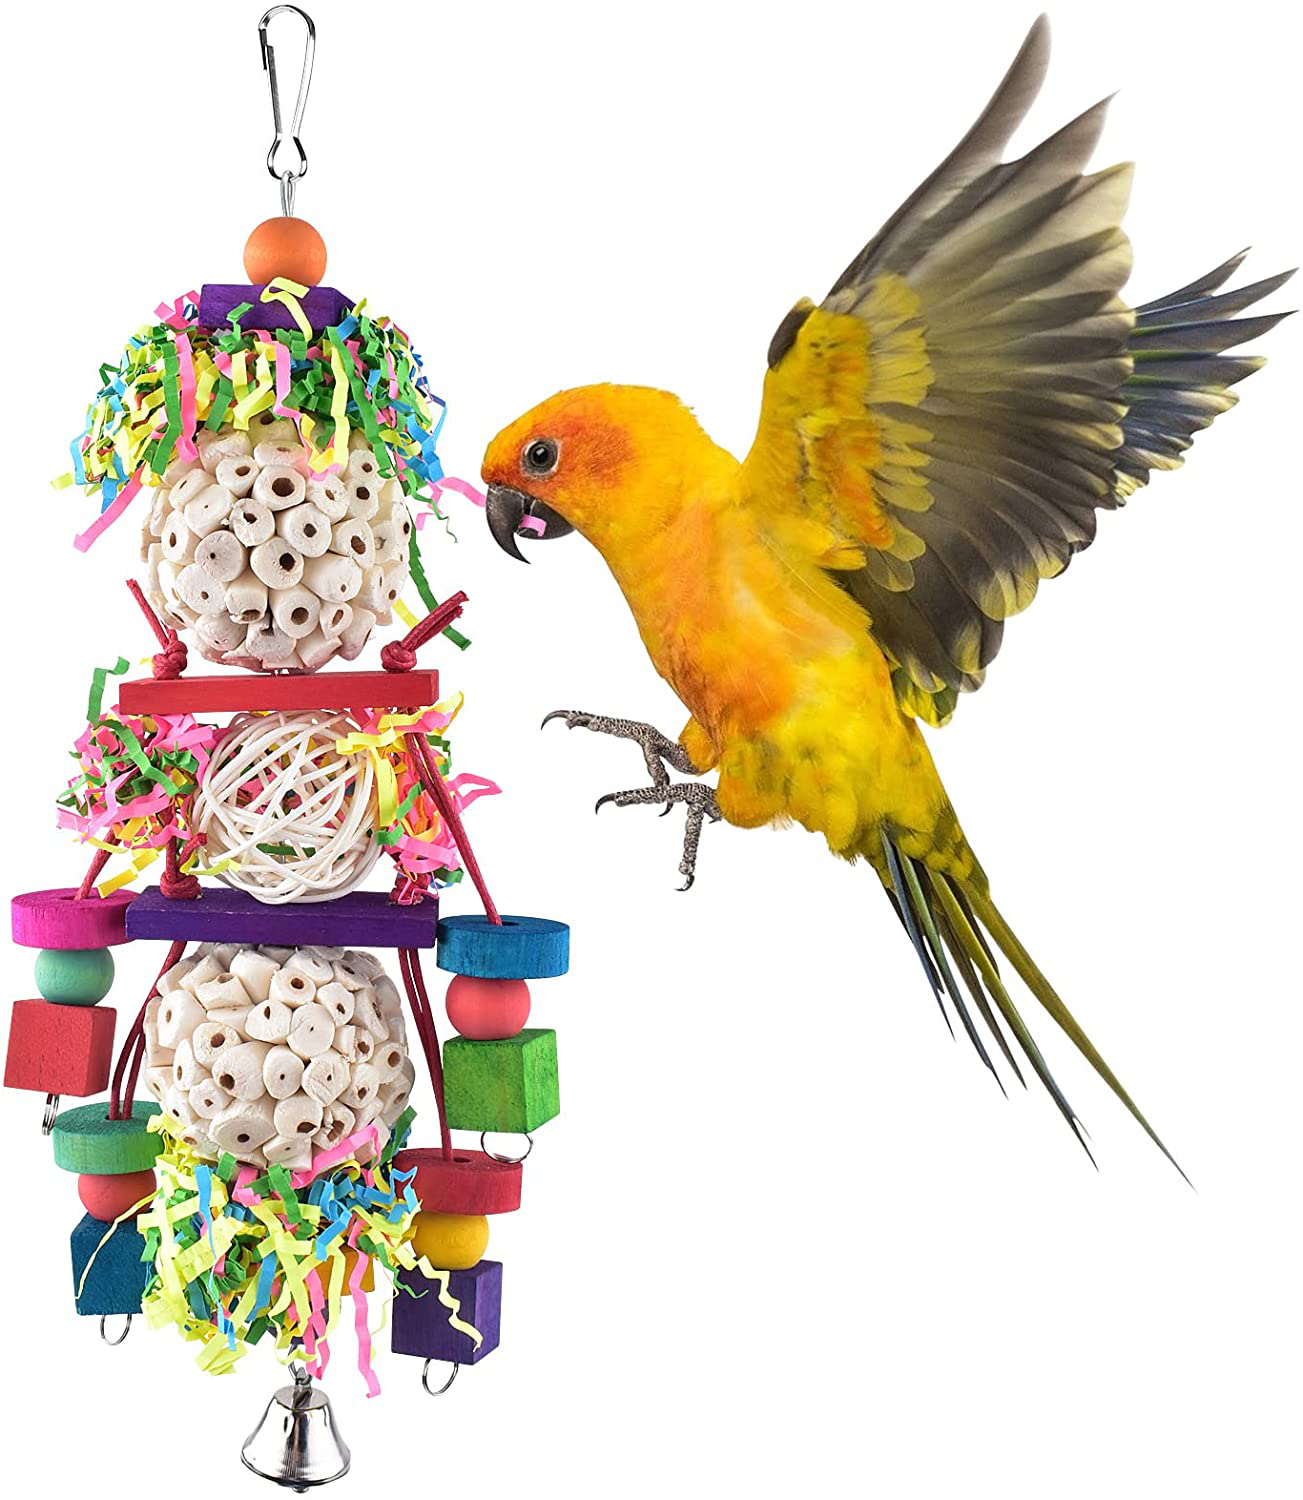 Bissap Conure Toys, Bird Parrot Foraging Shredder Hanging Toys Sola Balls Sepak Takraw with Bell for Small Parrots Parakeets Conures Cockatiels Love Birds Cage Toy